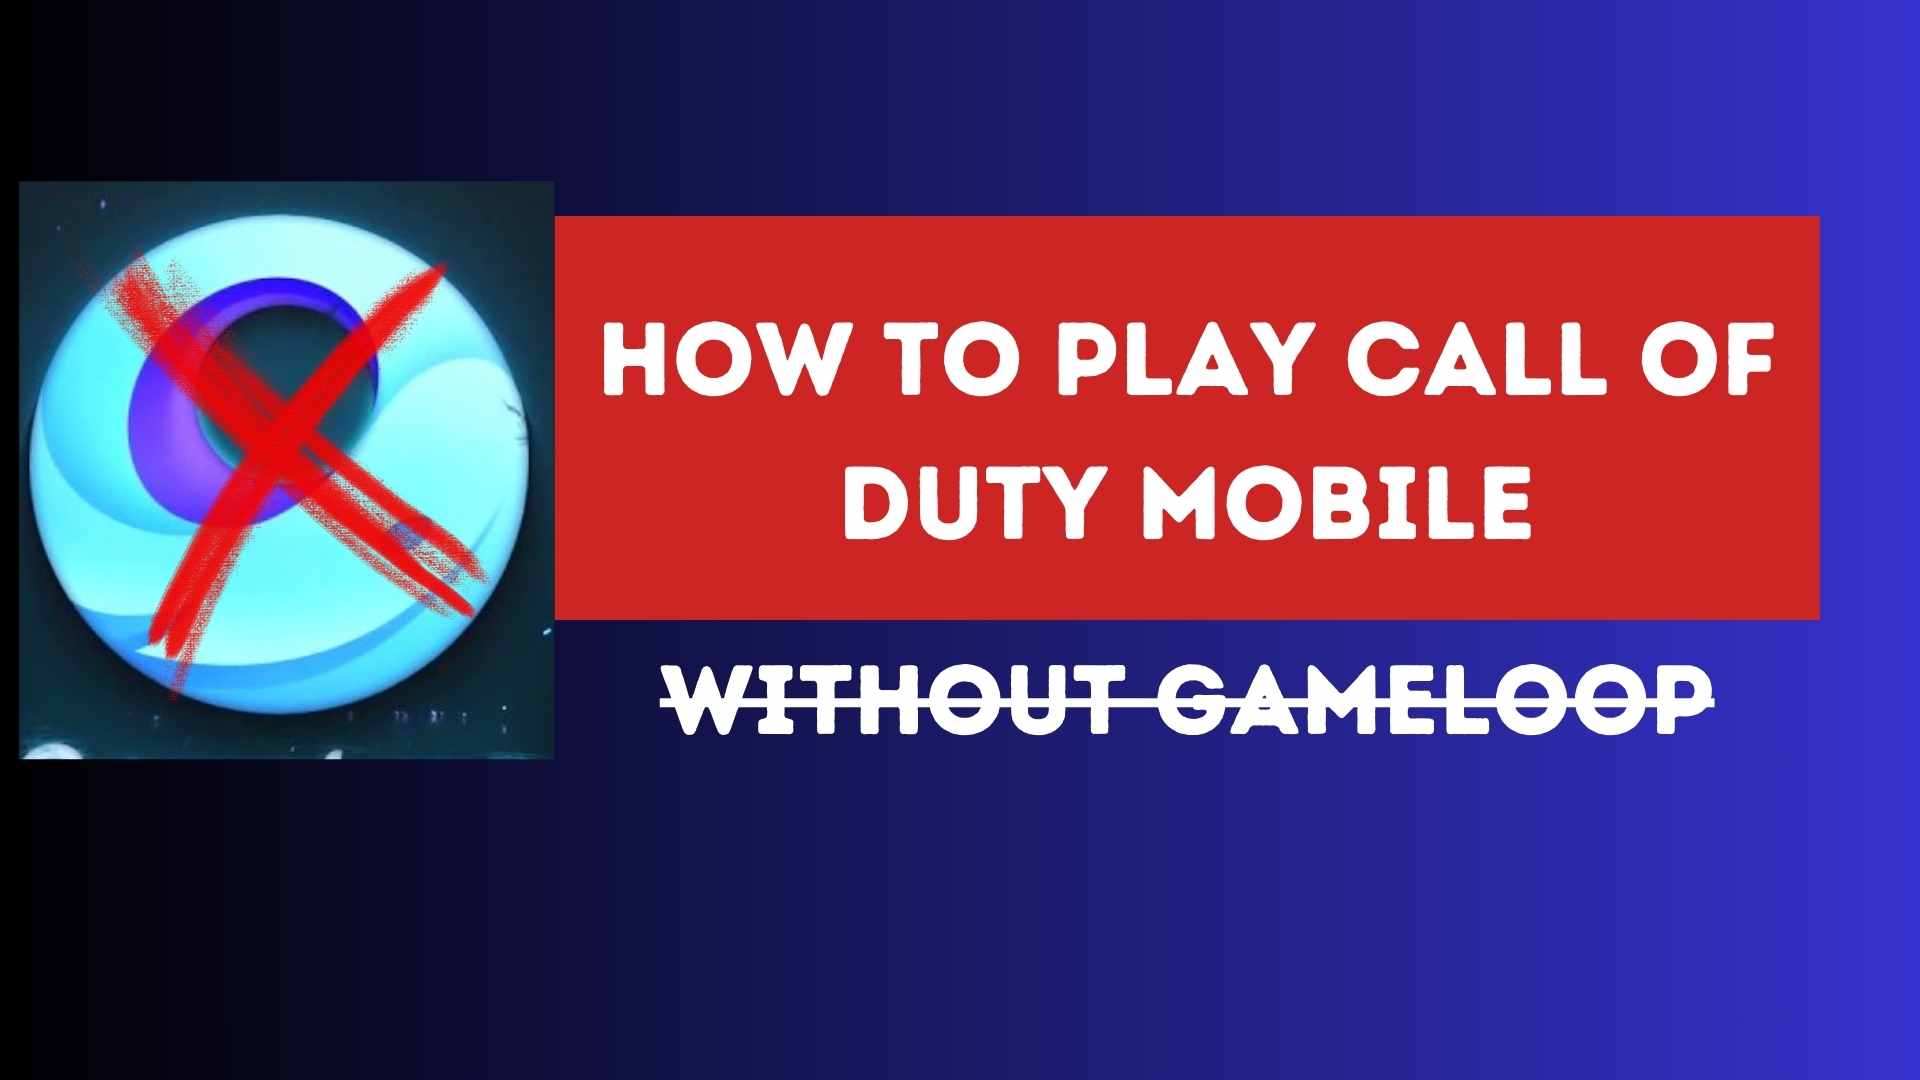 How to Play Call of Duty Mobile on PC without GameLoop